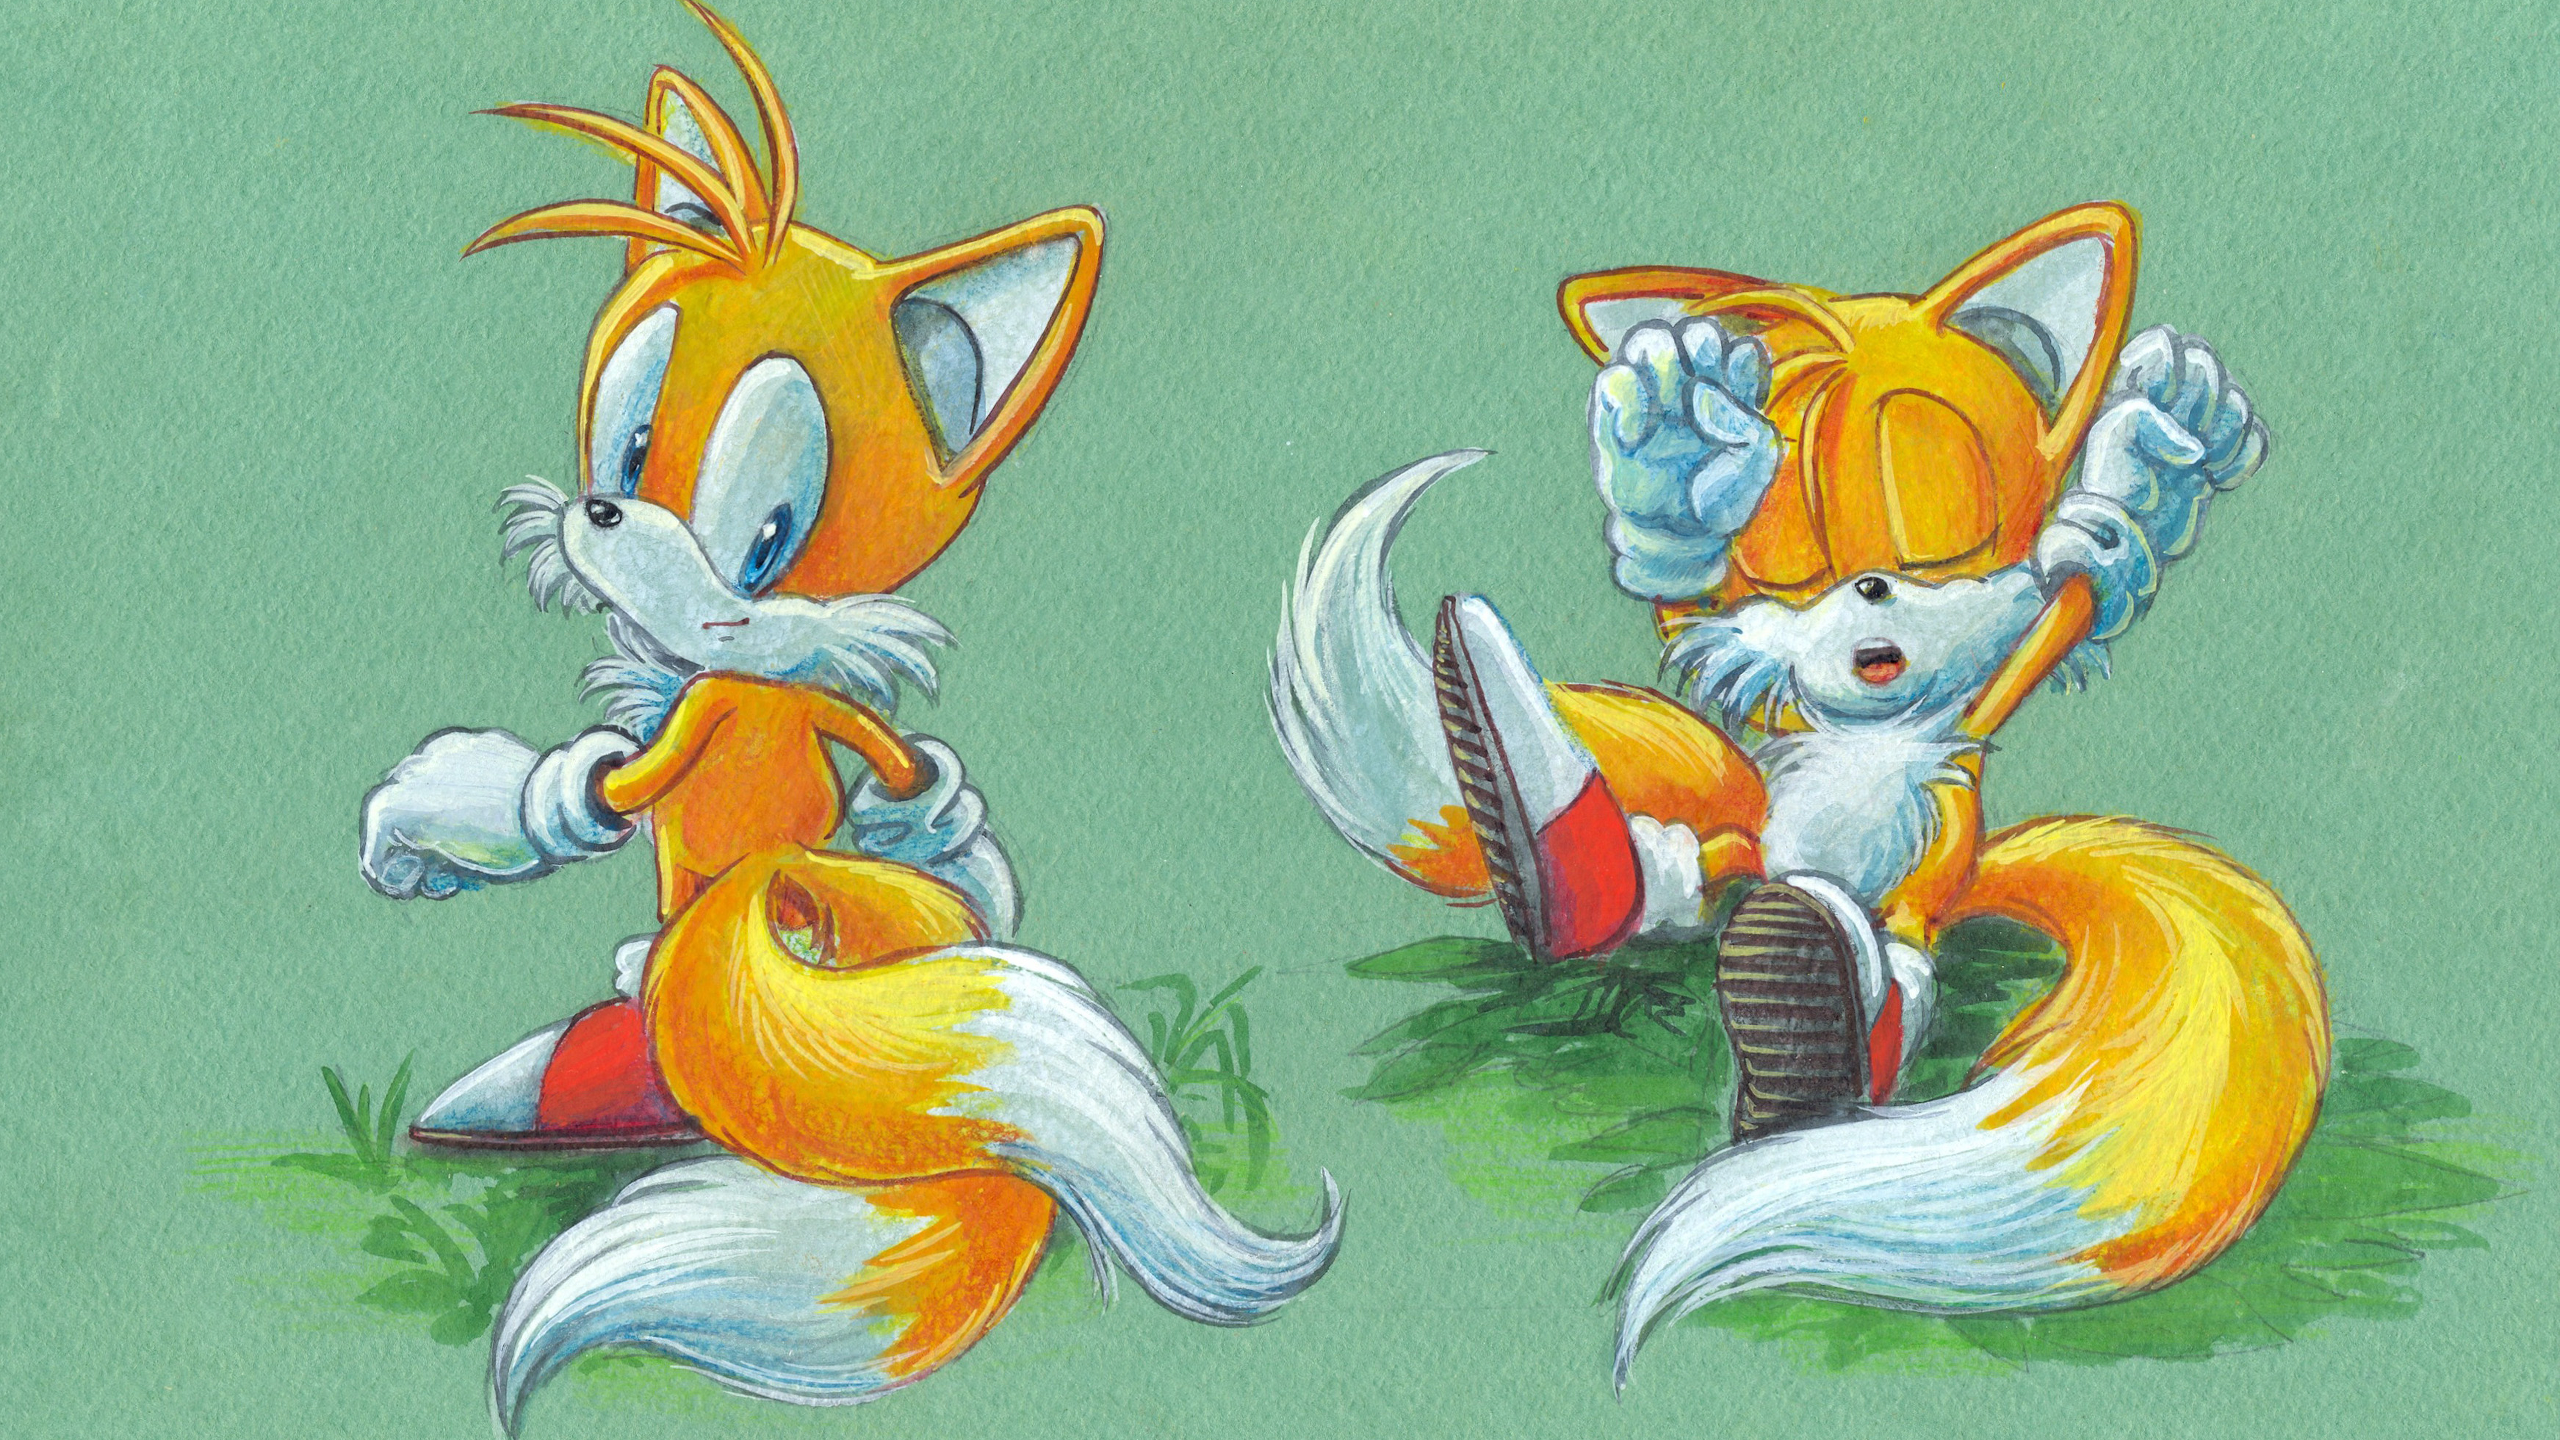 General 2560x1440 video games Sonic the Hedgehog Tails (character) fox video game art Sonic 3 Sonic 2 tail Sega artwork Anthro video game characters